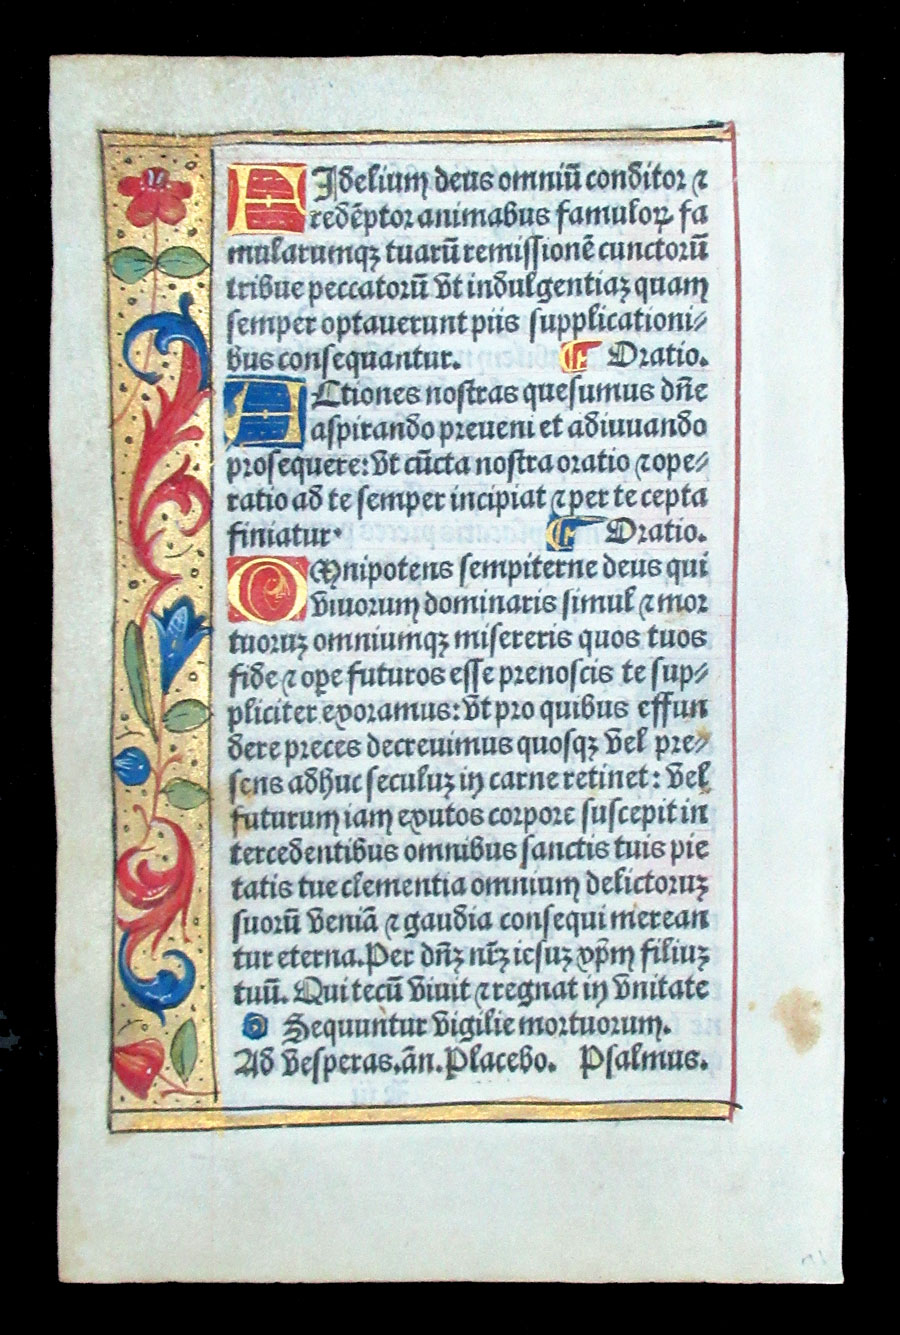 c 1532 Book of Hours Leaf - Litany of the Saints